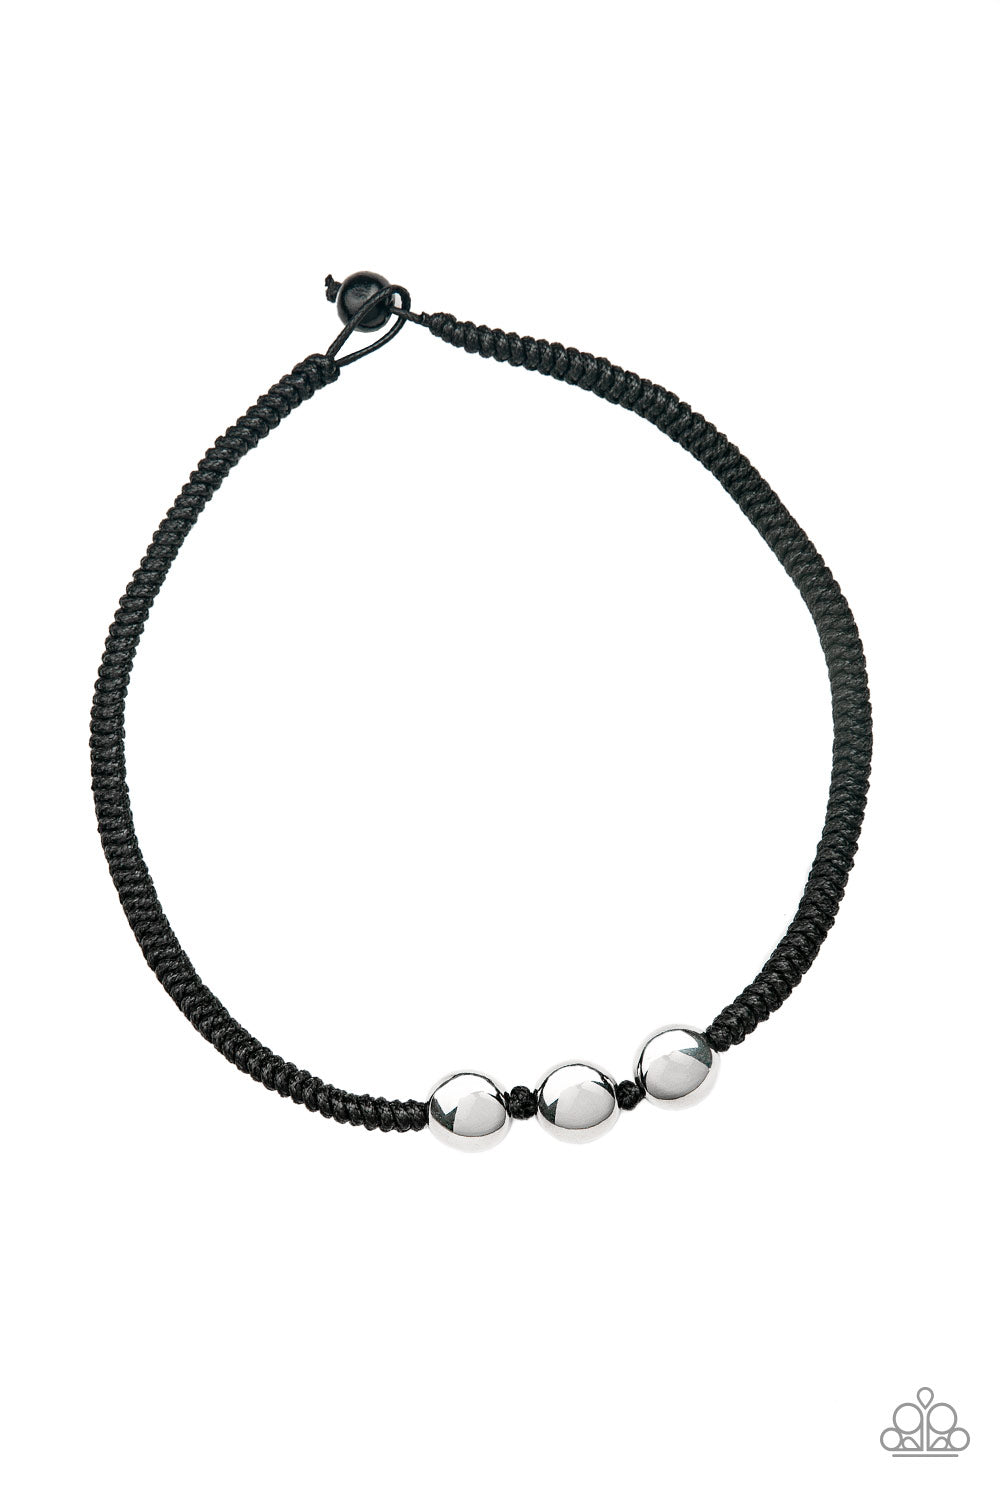 Pedal To The Metal Black Urban Necklace - Paparazzi Accessories